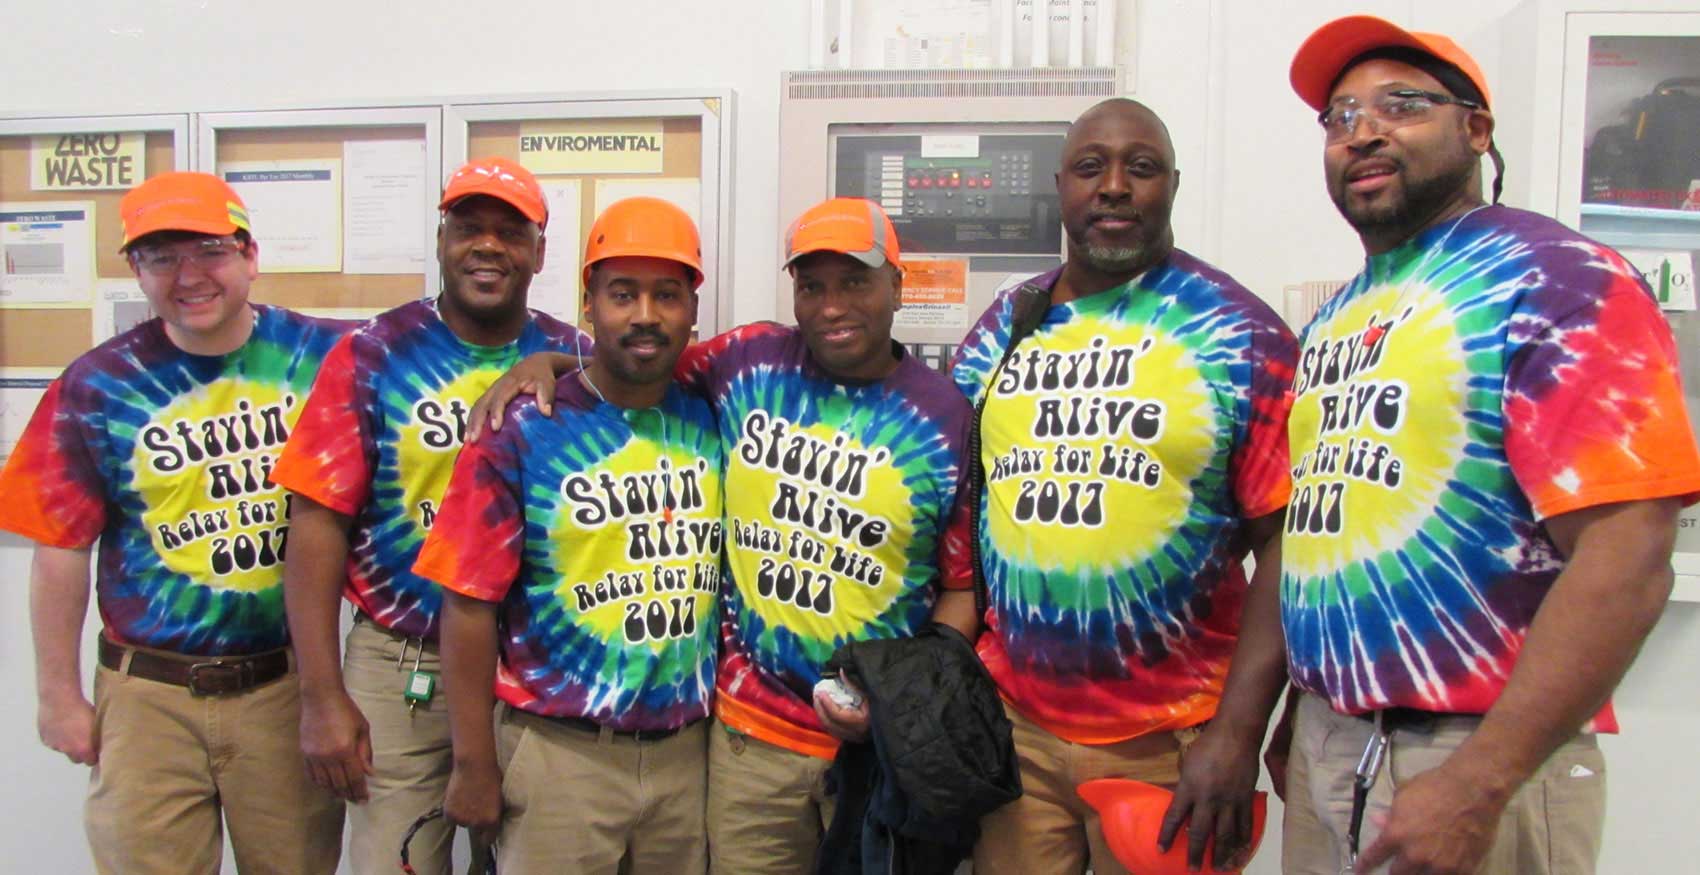 Associates with tie dye Relay for Life shirts on and hard hats